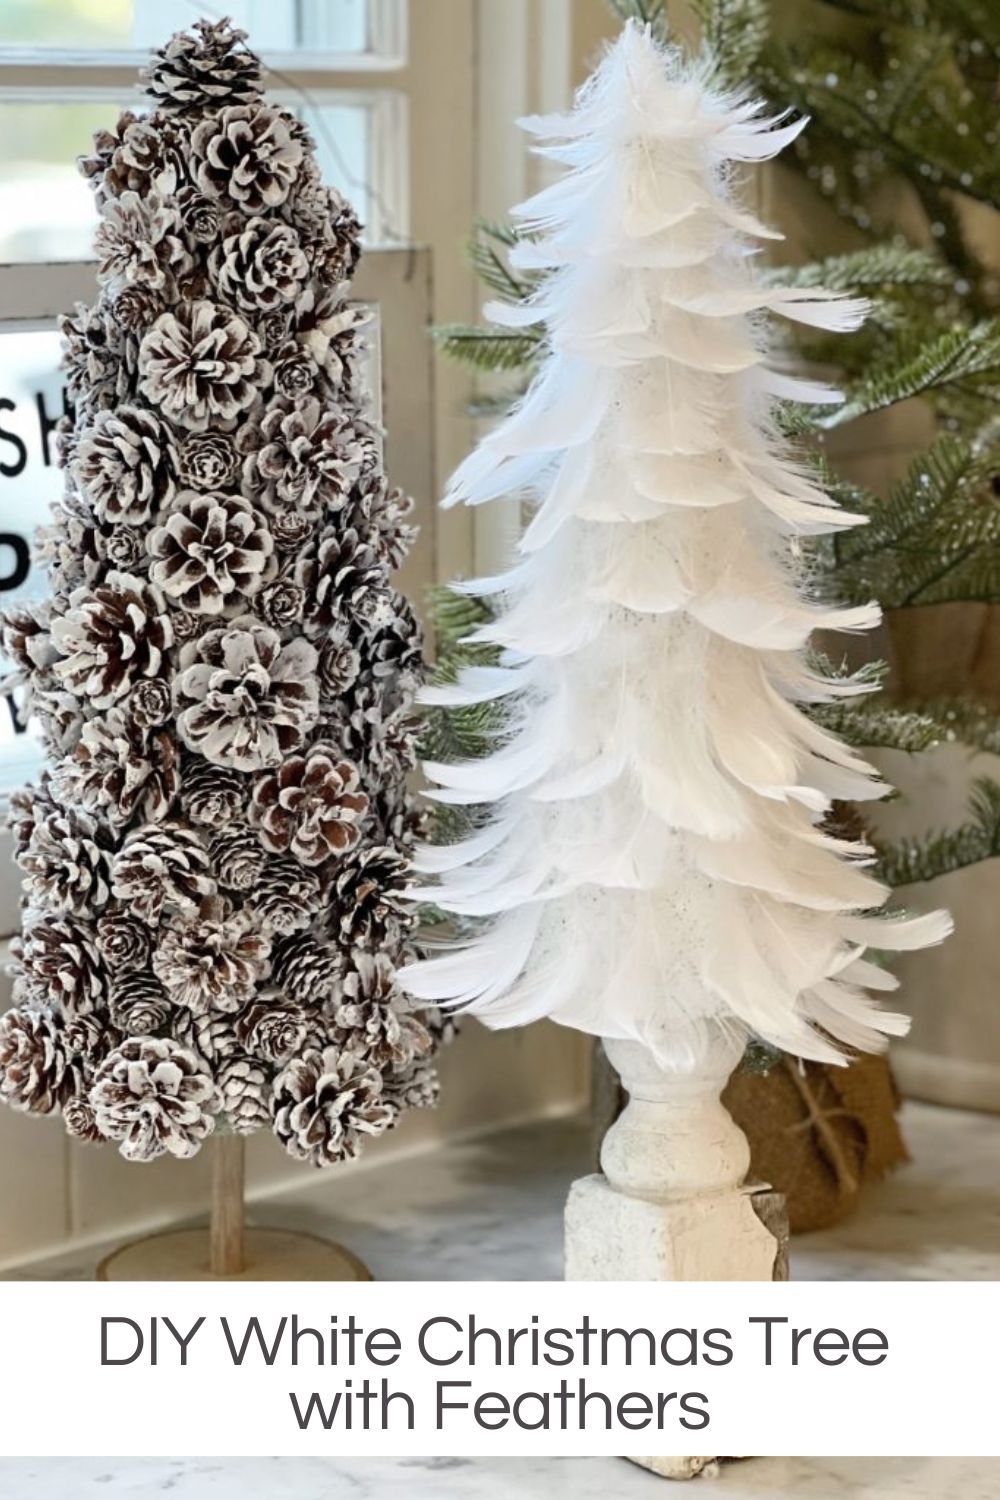 DIY White Christmas Tree with Feathers - MY 100 YEAR OLD HOME